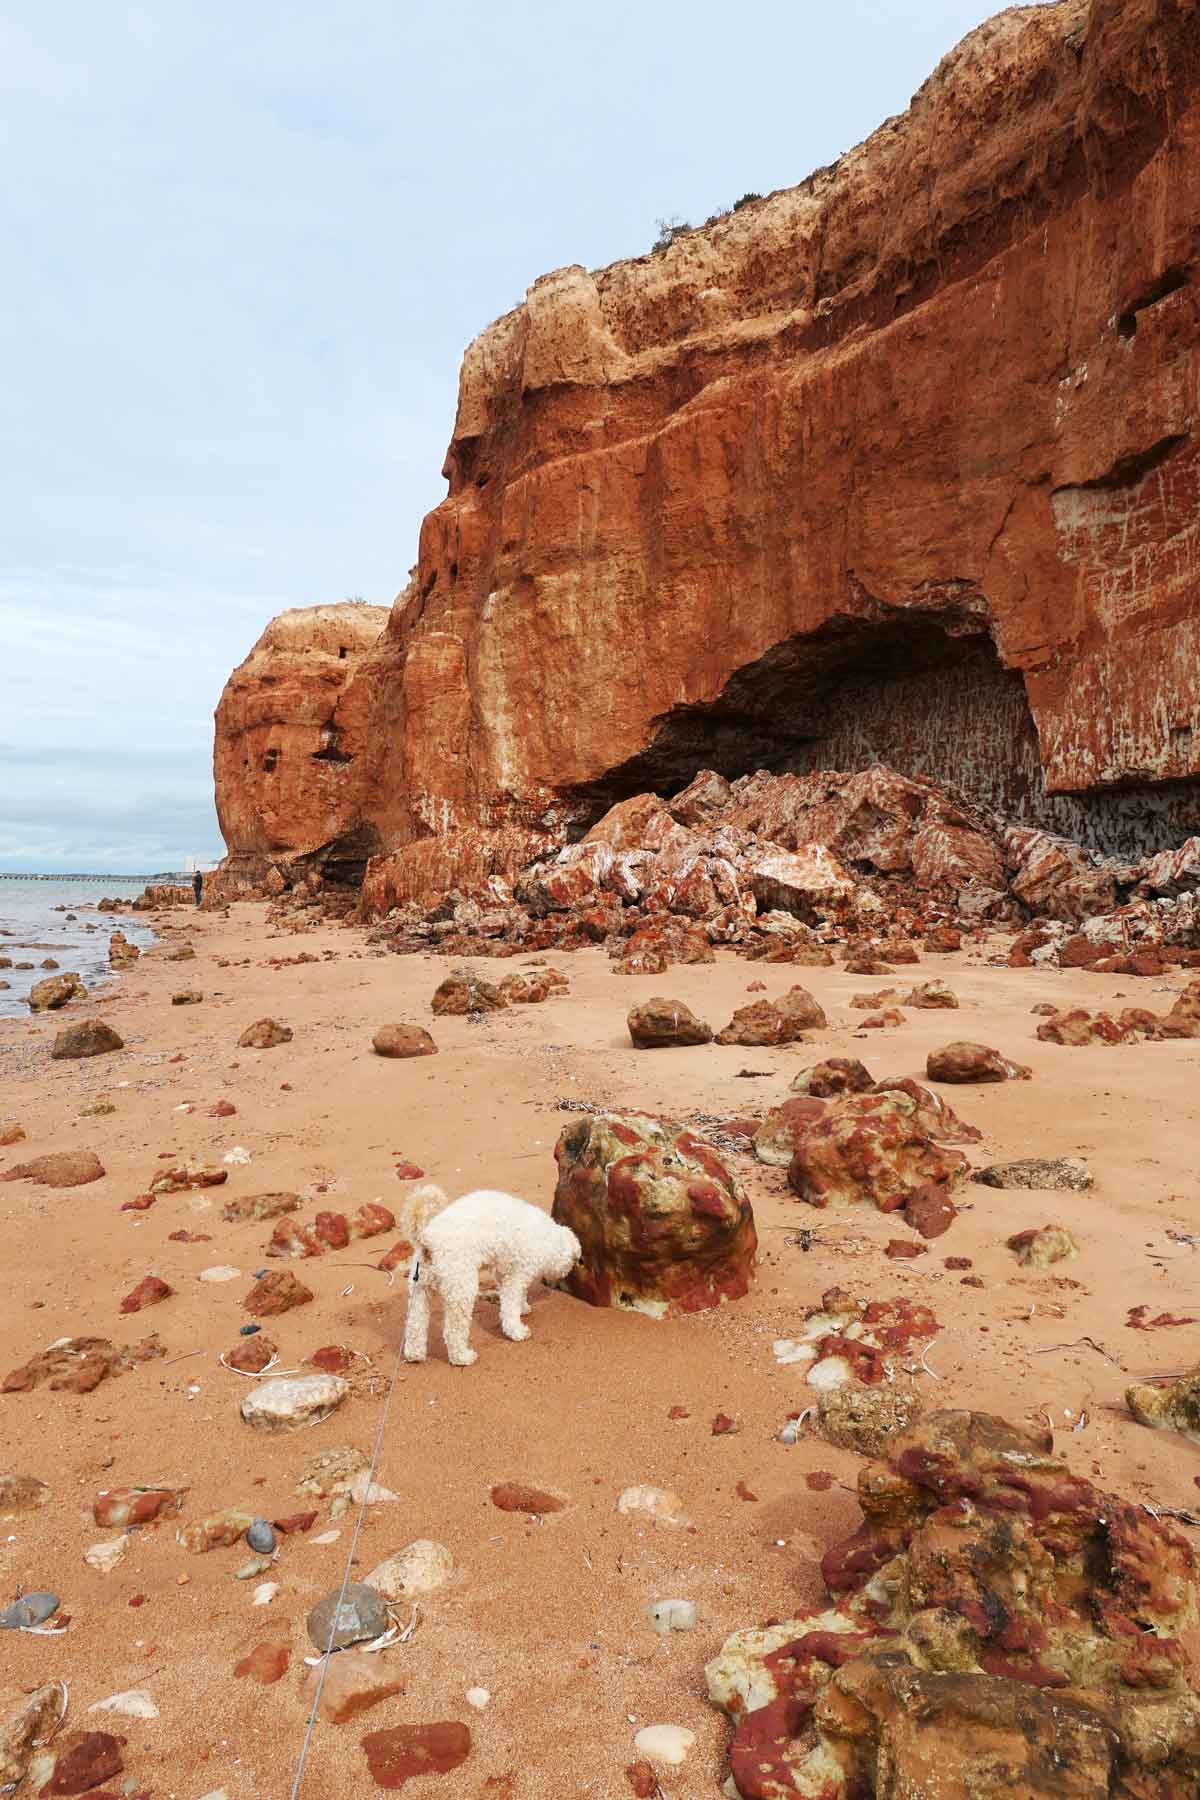 Exploring the red cliffs at Ardrossan